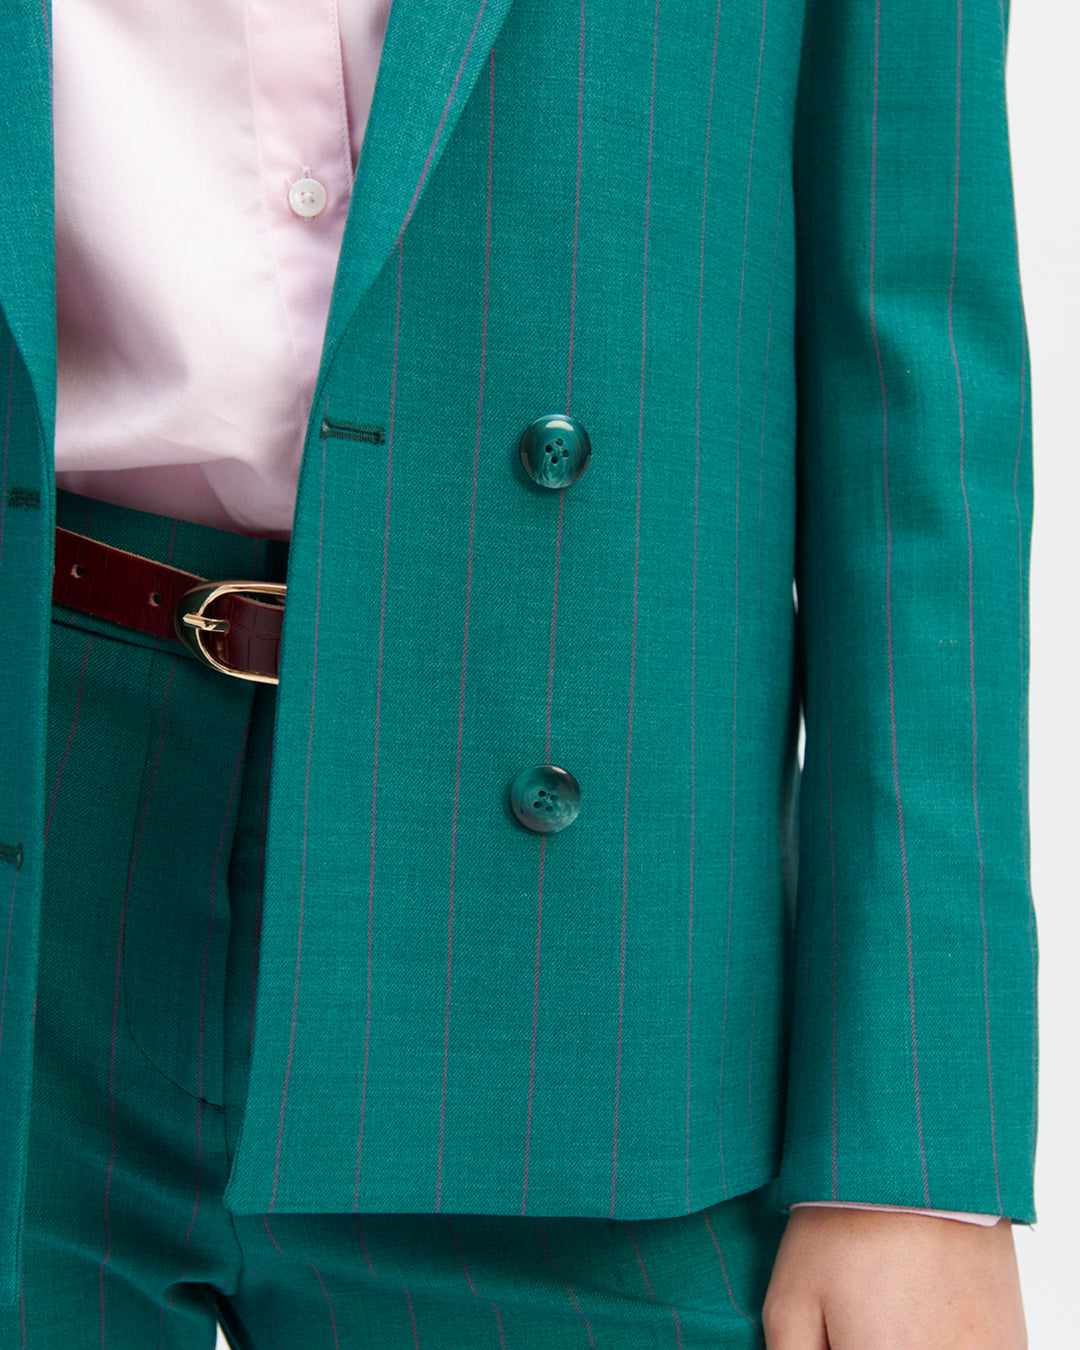 17H10-tailors-for-women-paris-green-jacket-emeraude-croisee-Double-buttoning-Two-pockets-sides-Two-pockets-interiors-Totally-double-